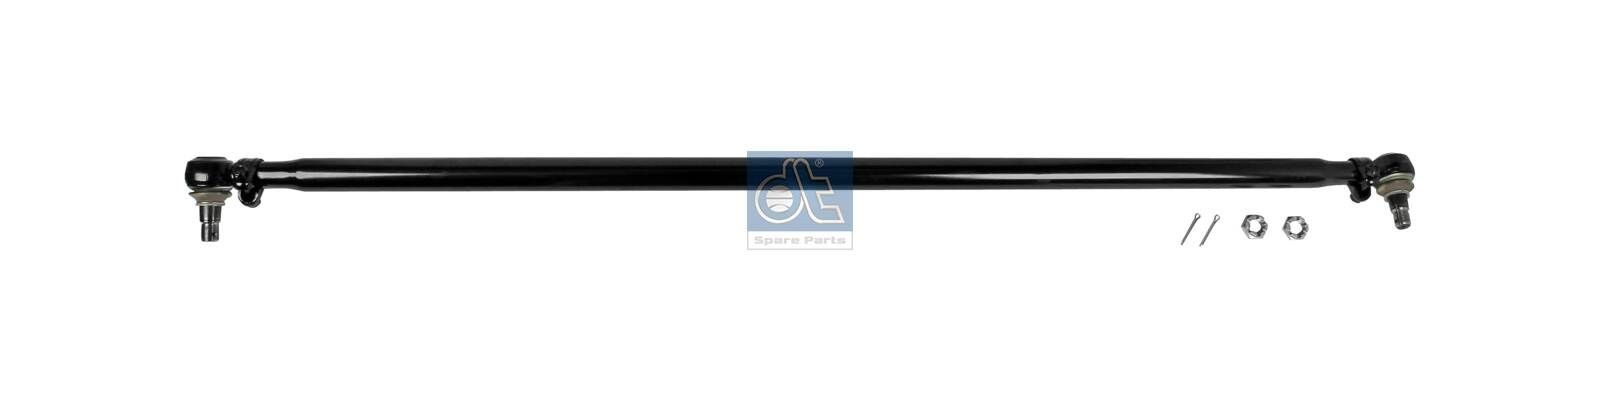 DT Spare Parts 6.53008 Rod Assembly 5010 098 467